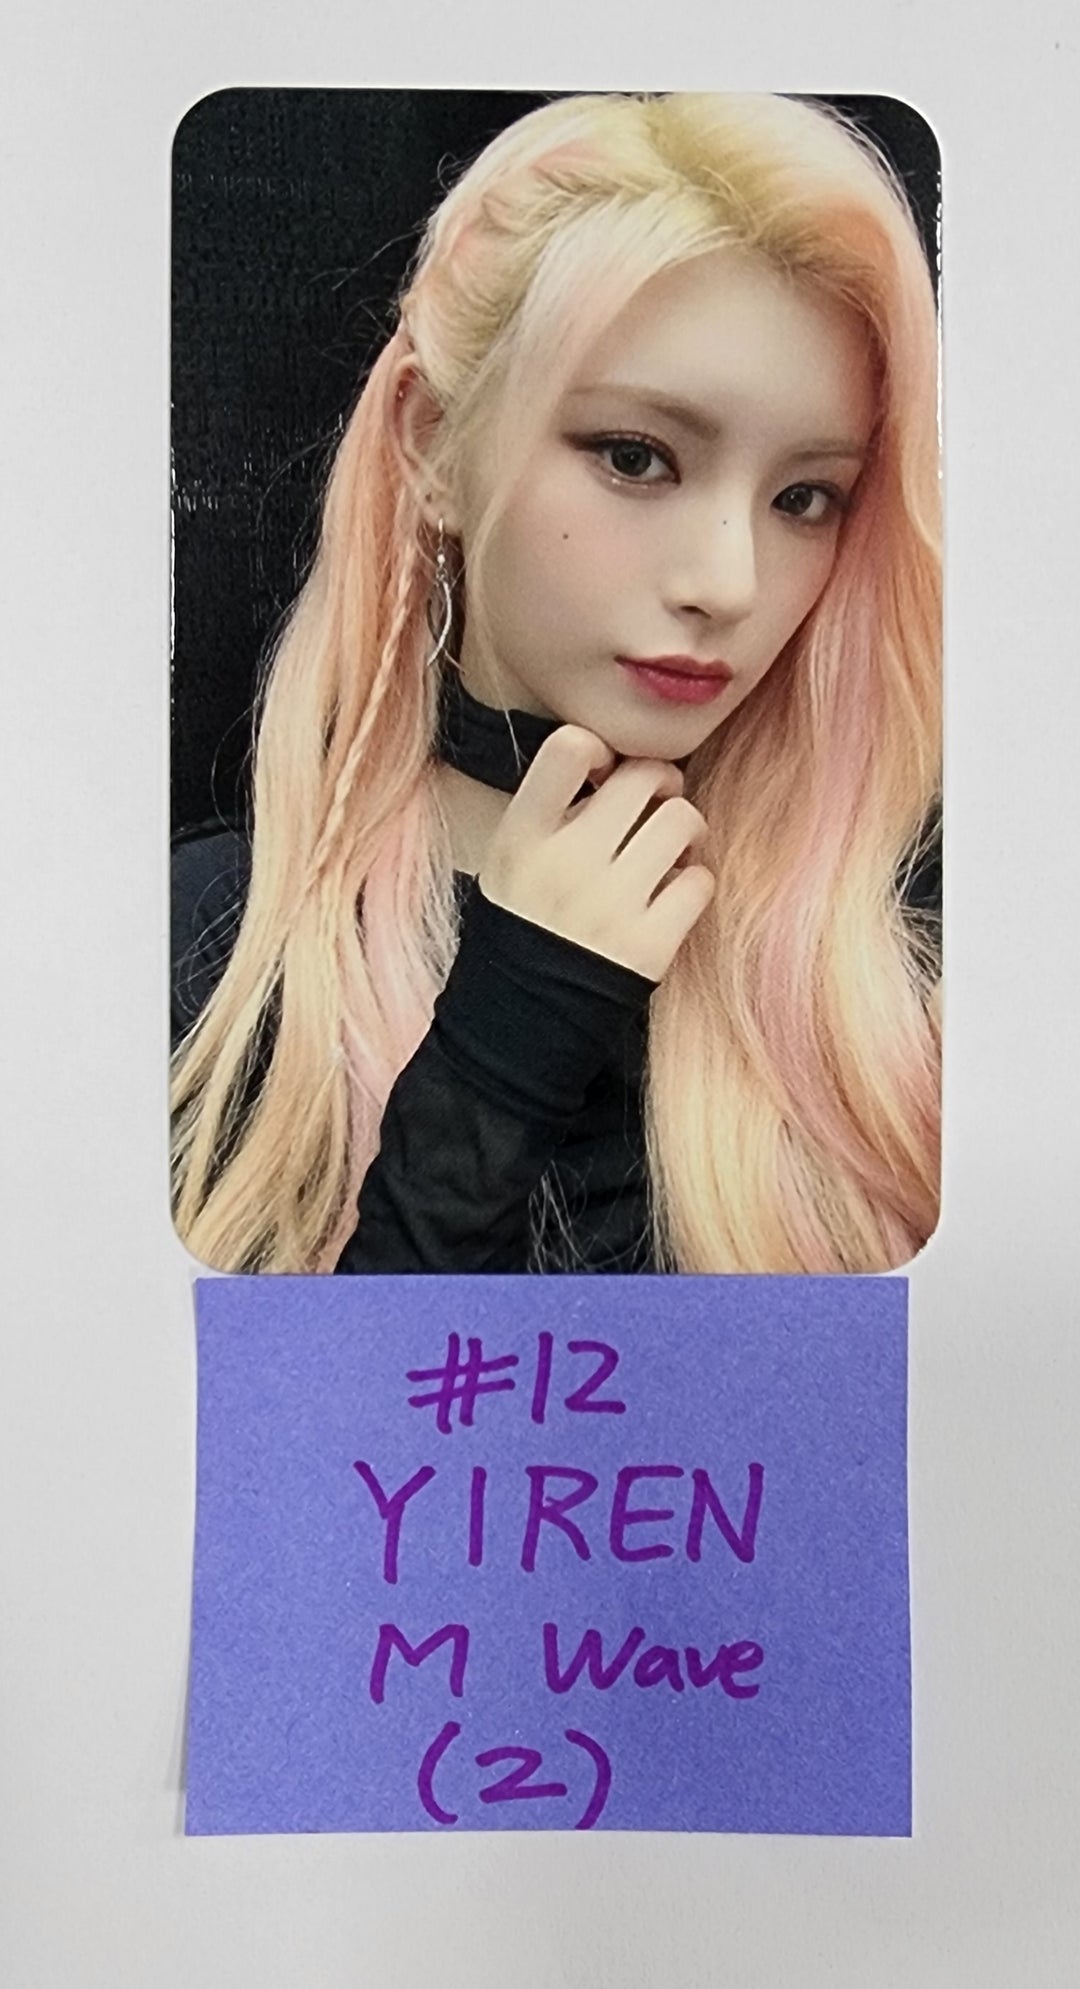 Everglow "ALL MY GIRLS" - M Wave Sign Album Event Photocard [23.10.26]